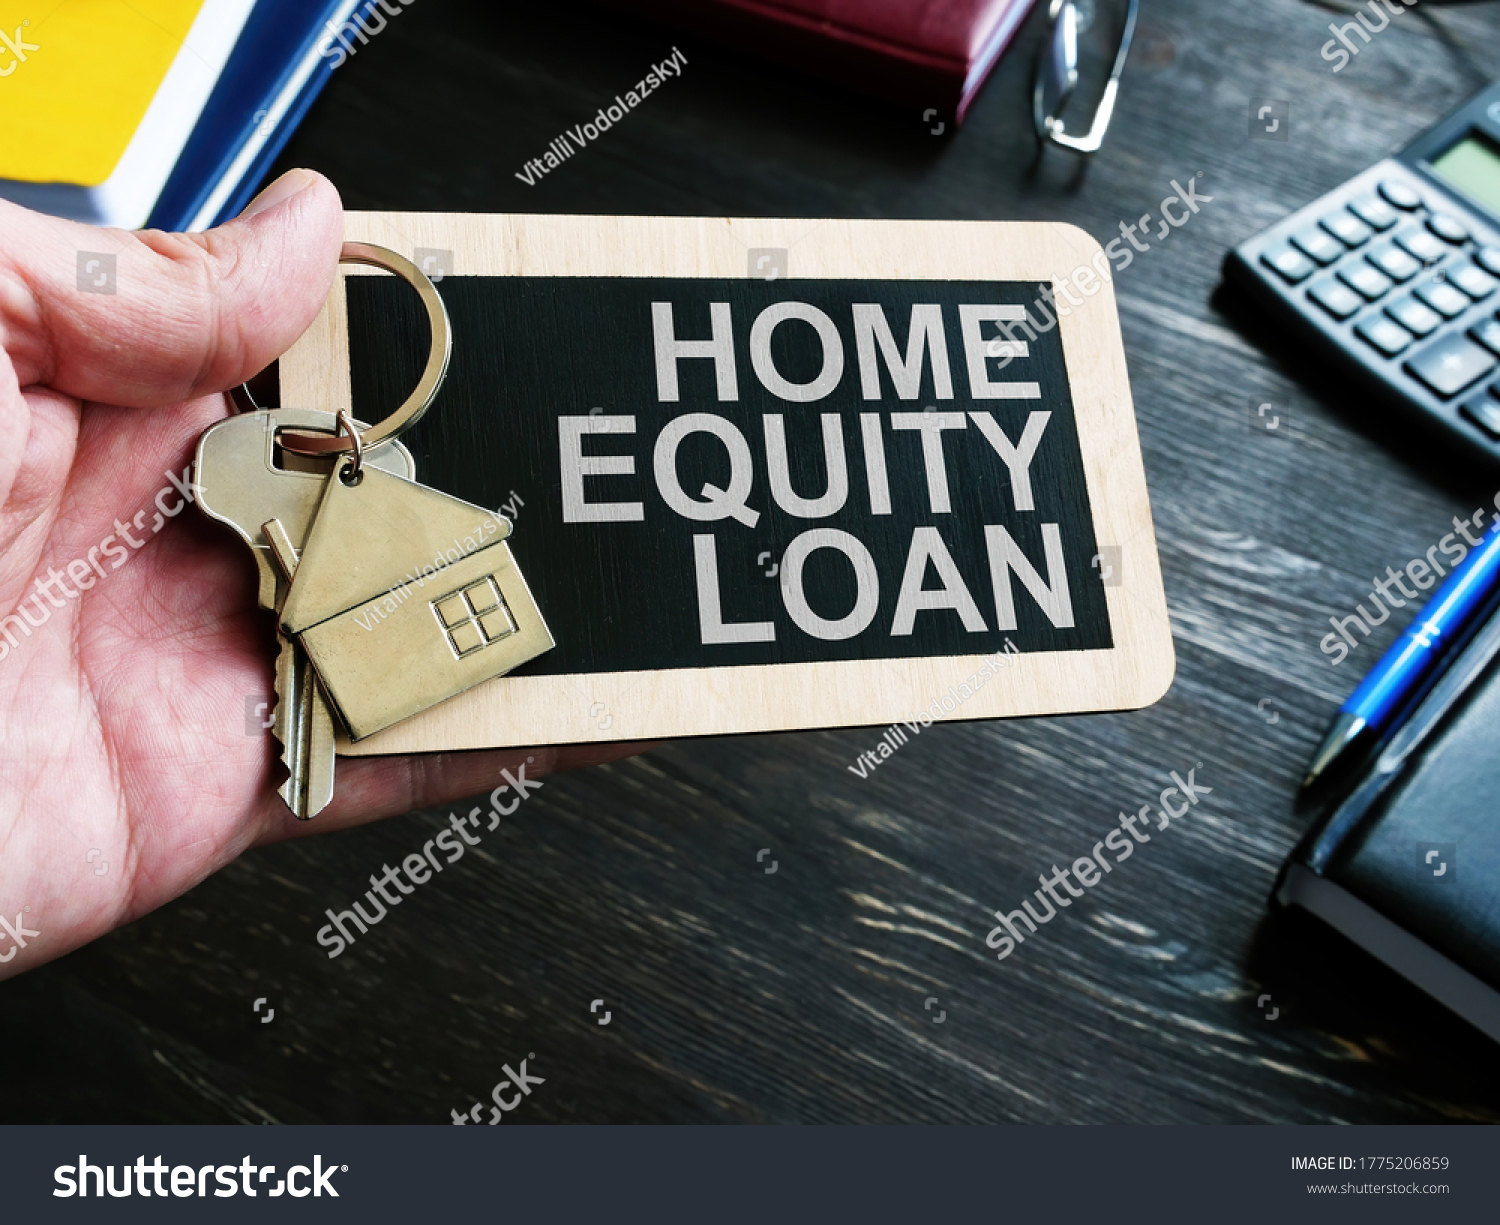 Home Equity Loan sign and key for house. #1775206859